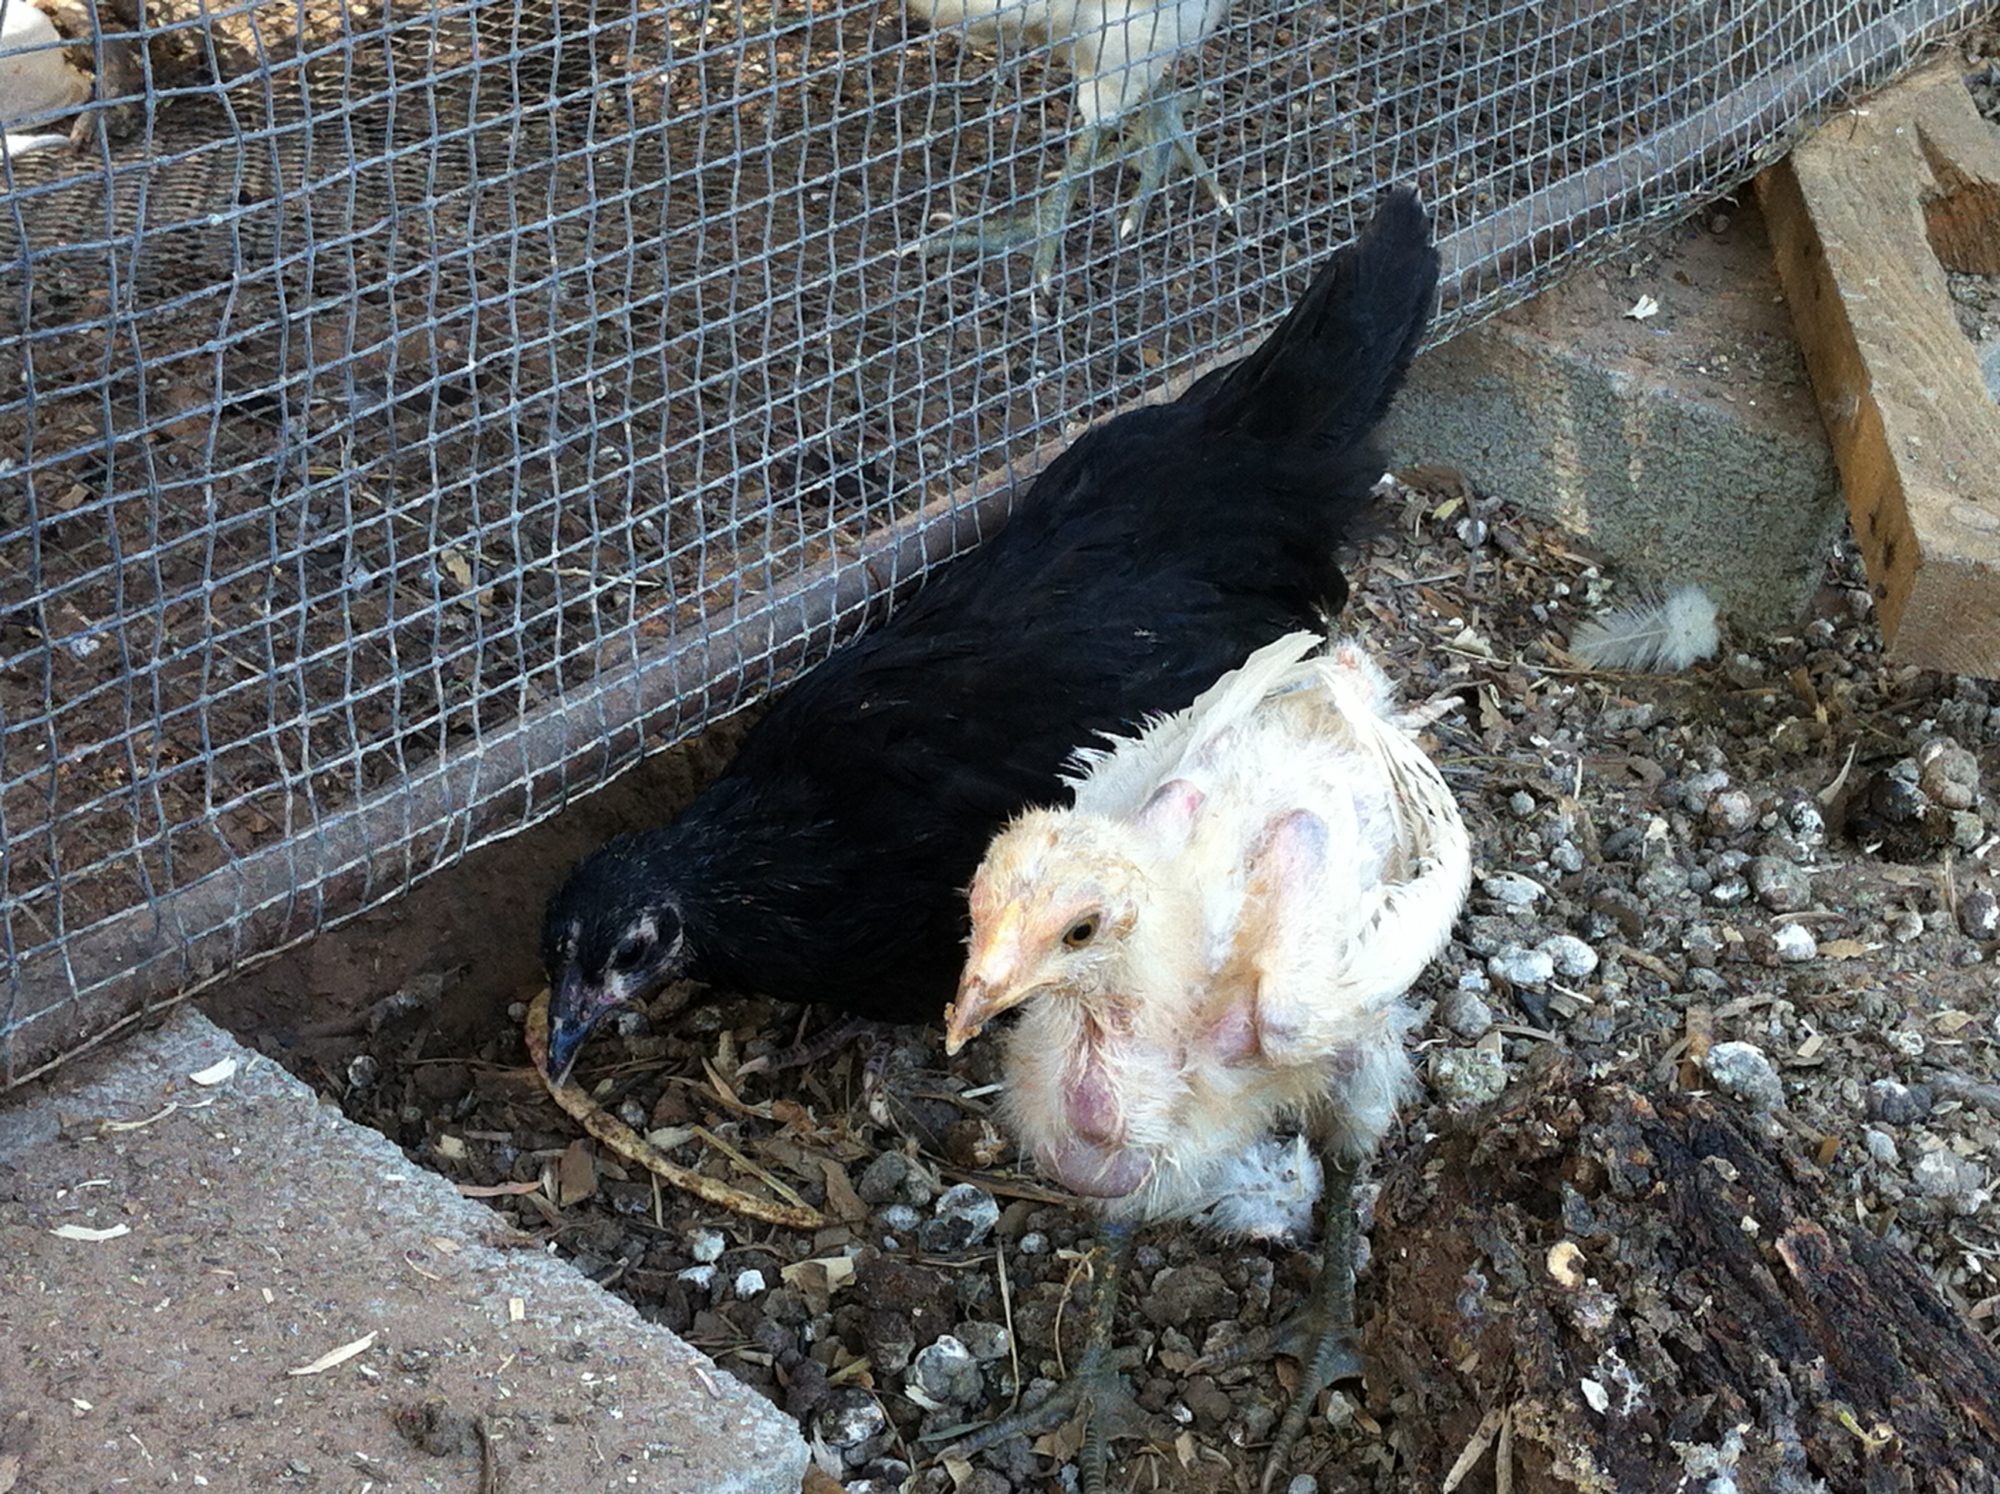 One of the Black Australorps with Legs, an EE?